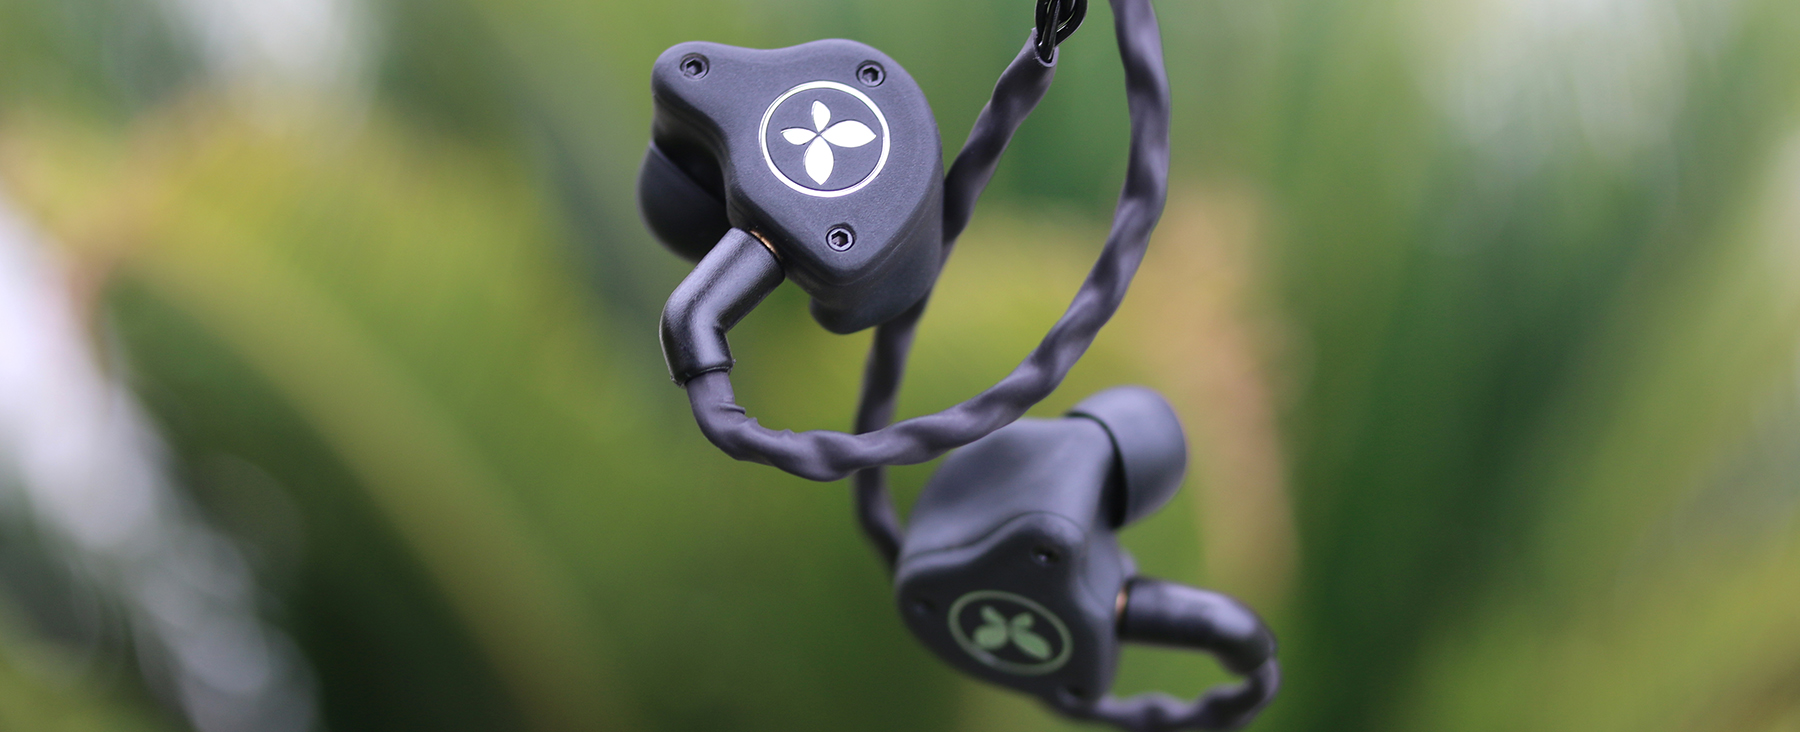 Bellos Audio X2 In-Ear Monitors Overview